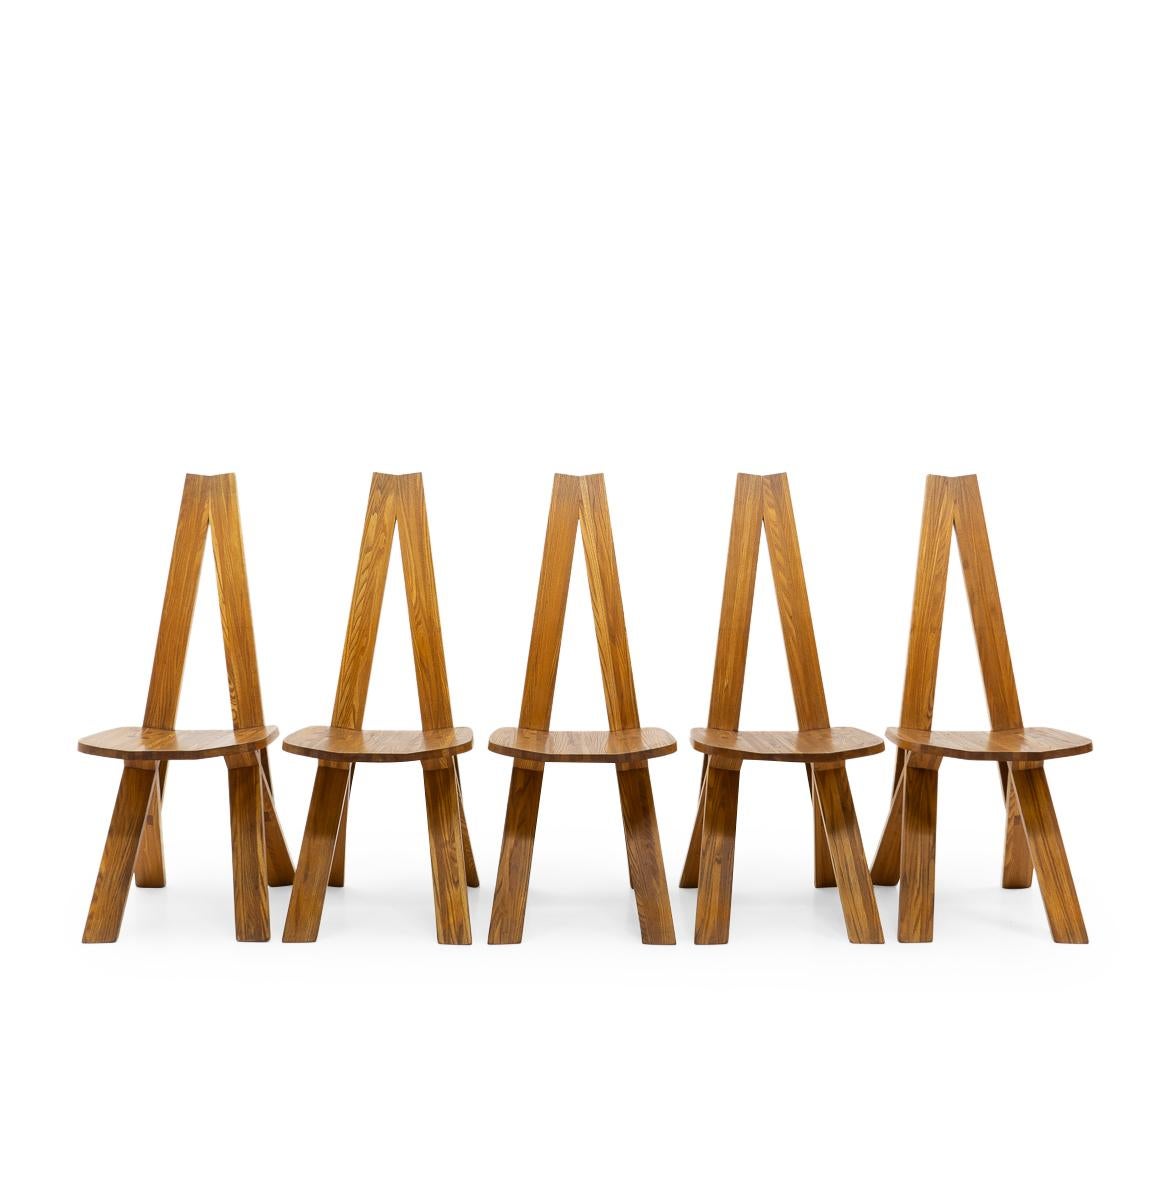 Set of five S45 ‘Chlacc’ chairs by Pierre Chapo:

“The S45 is one of the most sculptural creations in the Chapo catalogue, a design that bears not a passing resemblance to the iconic tower in the capital where it’s creator was born.” (From Pierre